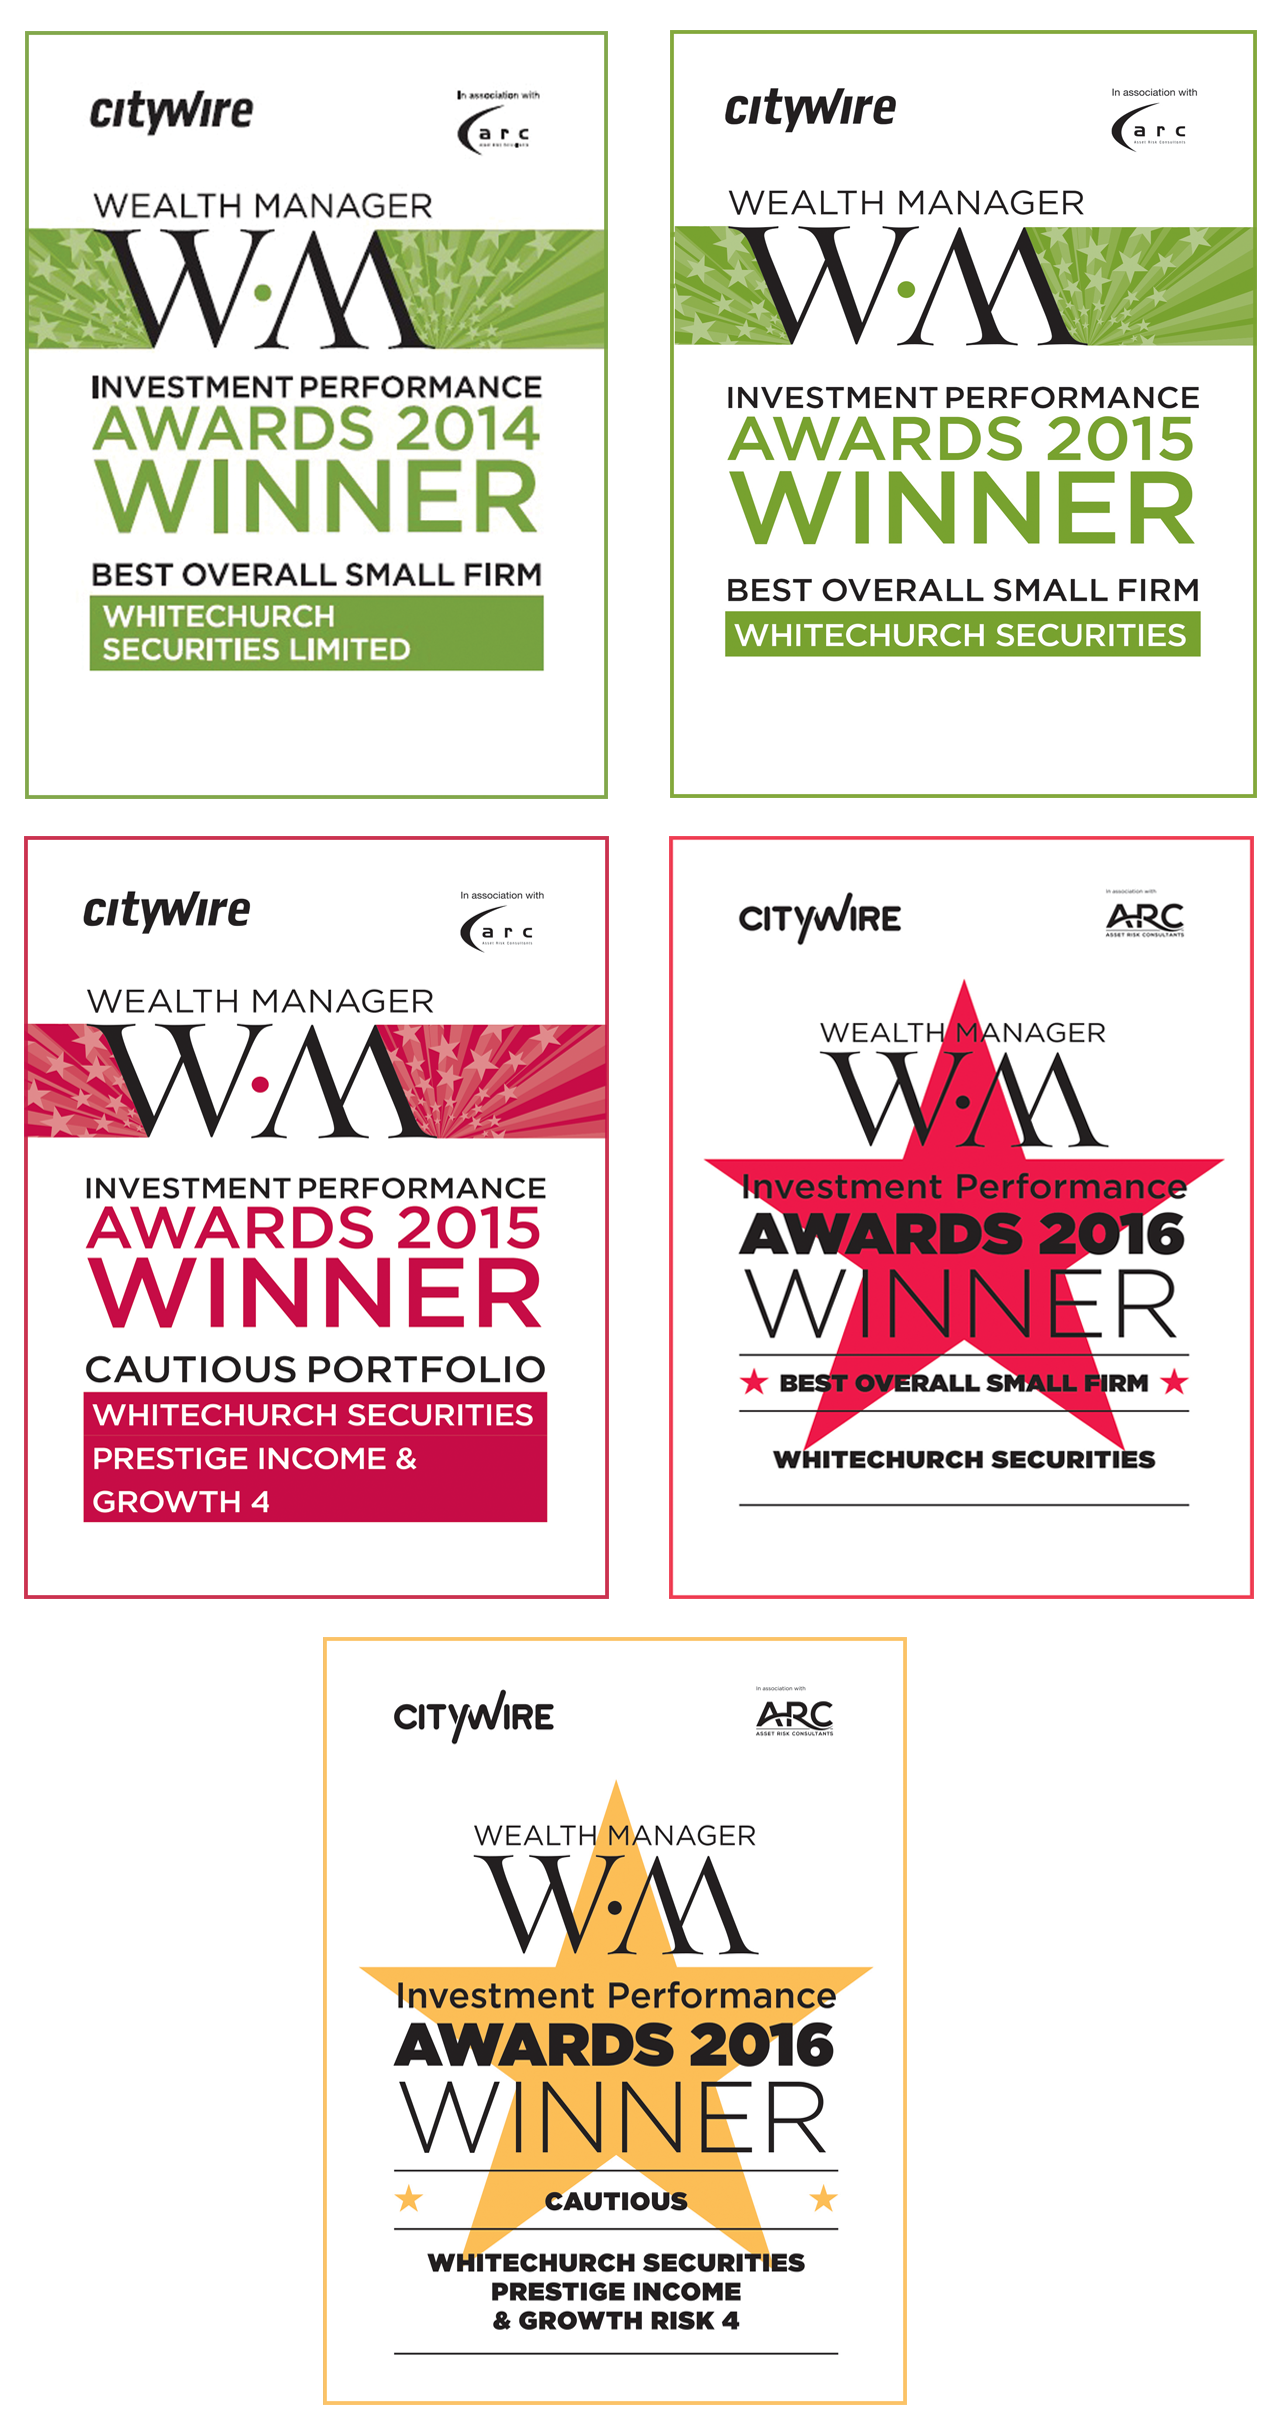 CITYWIRE AWARDS